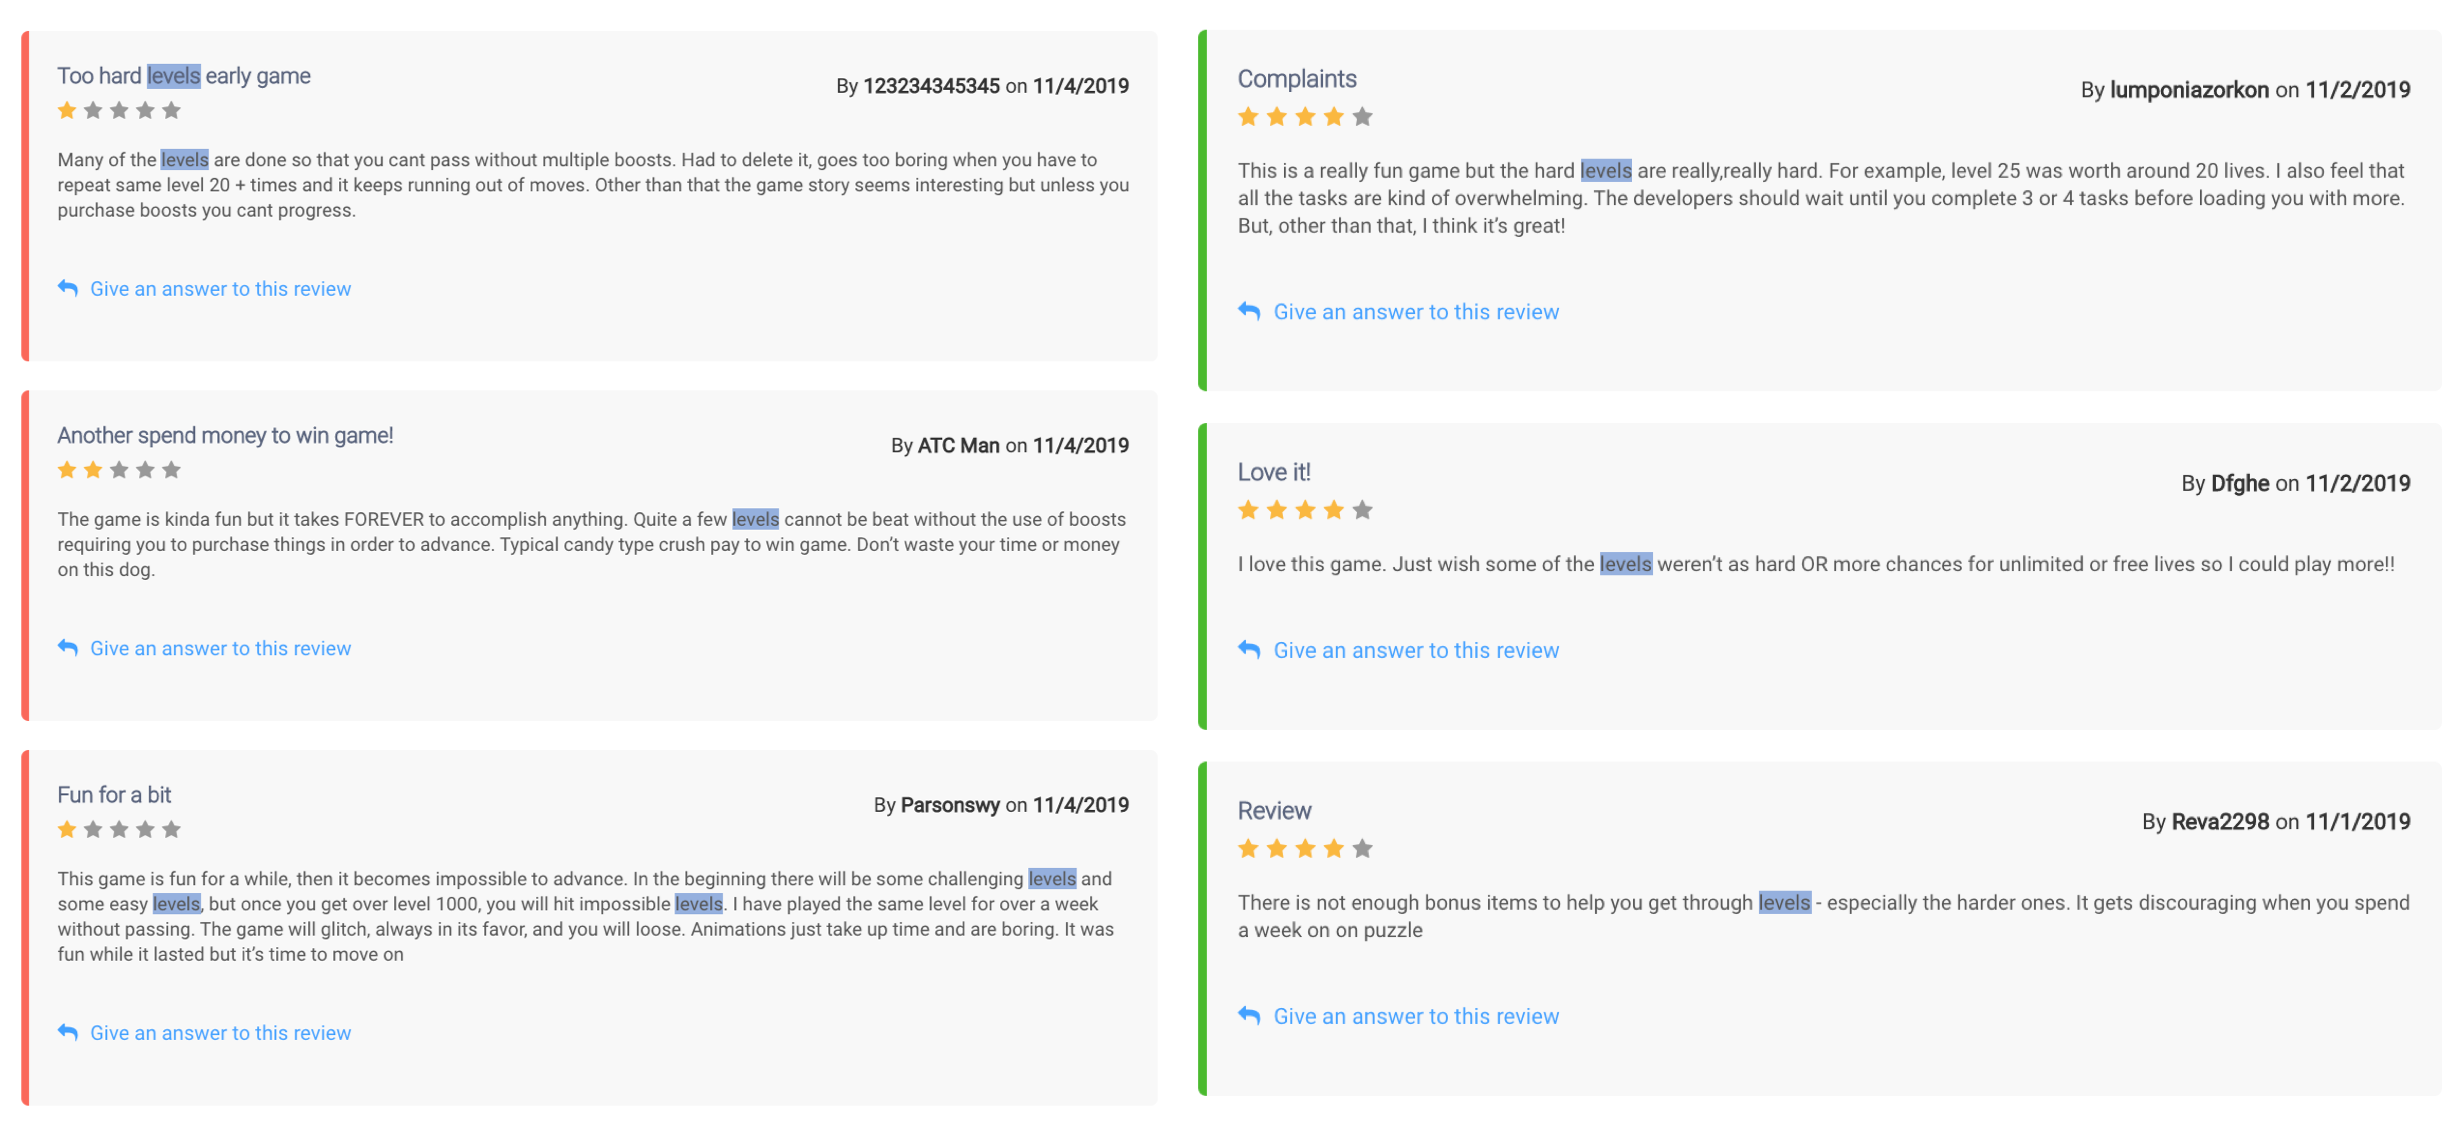 AppTweak ASO Tool - Reviews and Ratings Keyword Sentiment Analysis: Positive and negative reviews for Gardenscapes that contain the keyword “levels”